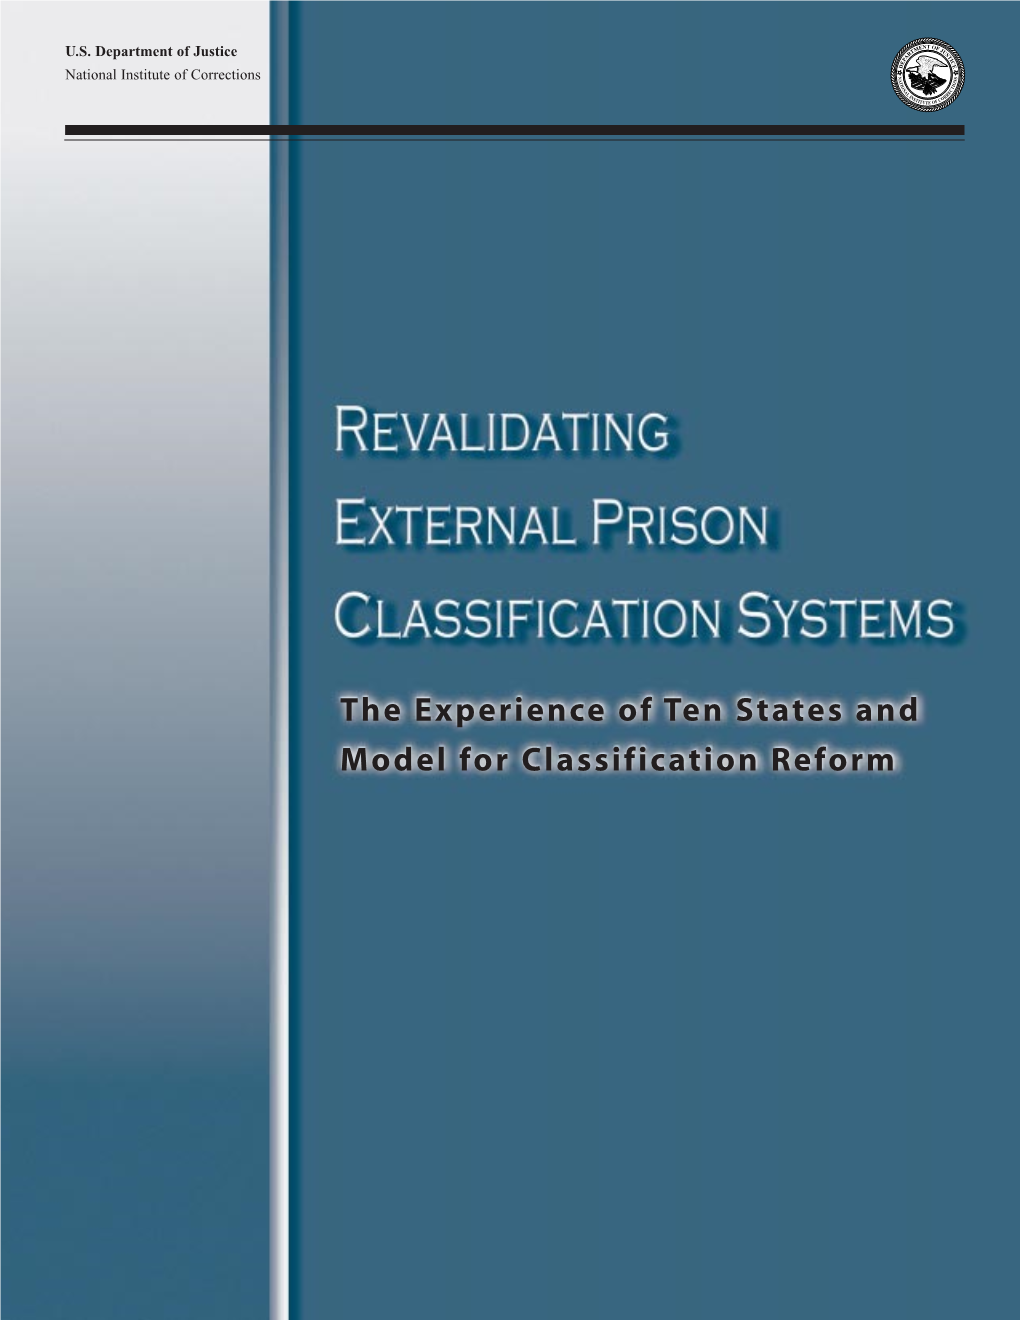 Revalidating External Prison Classification Systems: the Experience of Ten States and Model for Classification Reform